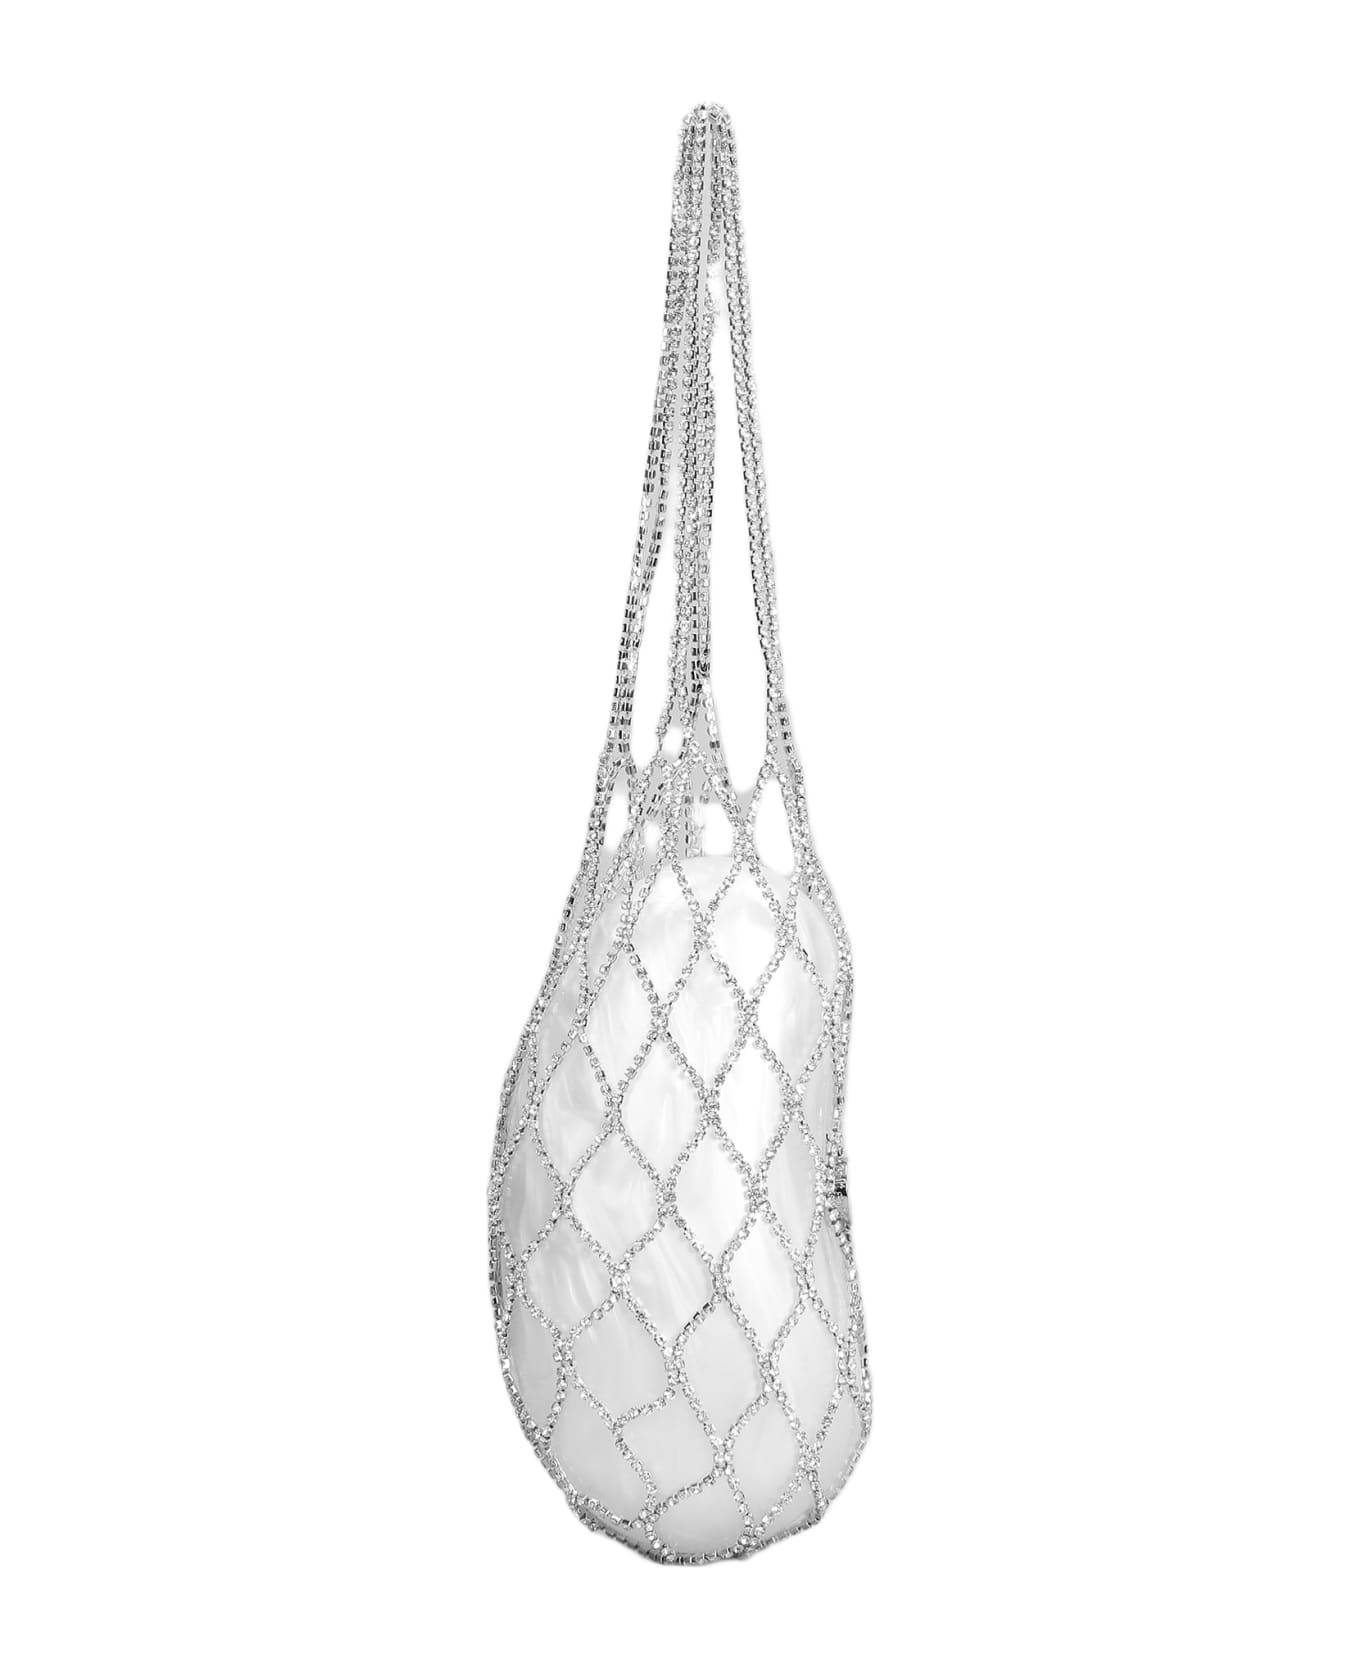 Cult Gaia Tallulah Hand Bag In White Acrylic - white トートバッグ